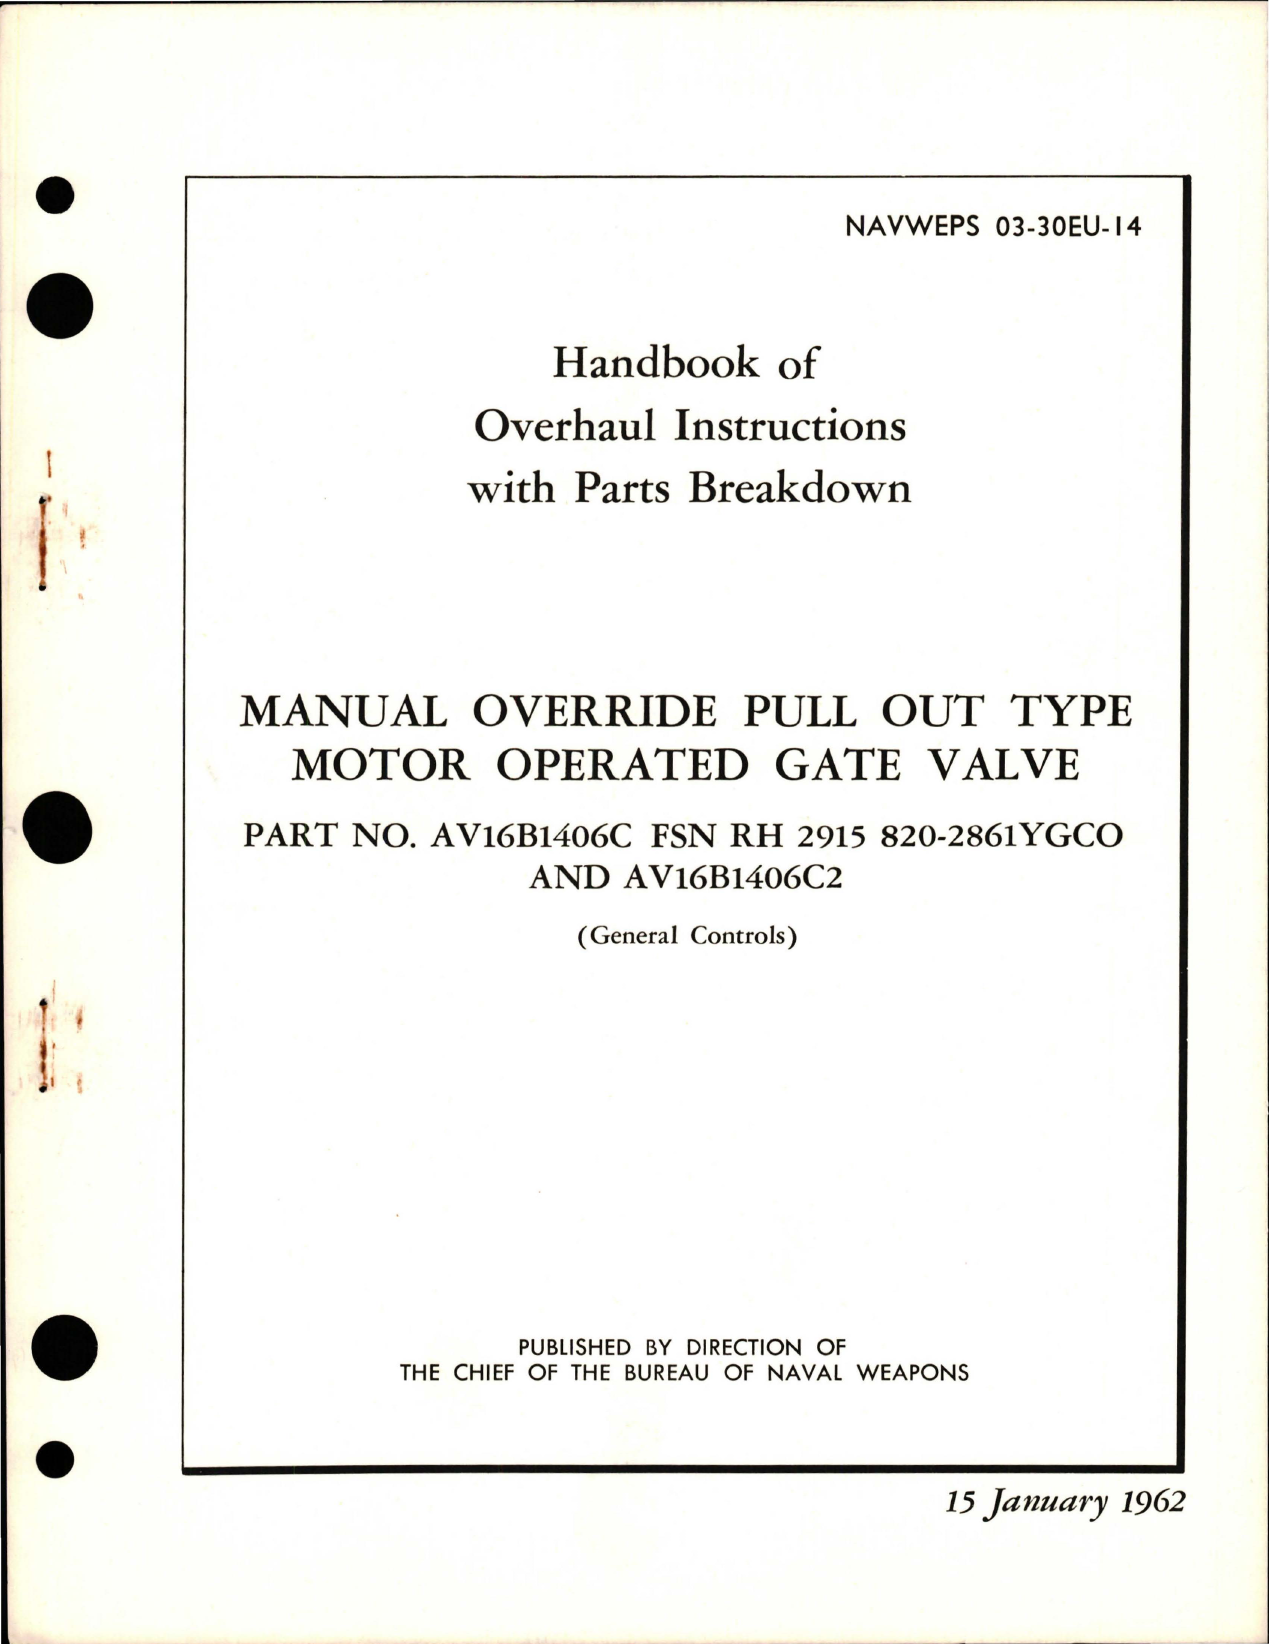 Sample page 1 from AirCorps Library document: Overhaul Instructions with Parts Breakdown for Manual Override Pull Out Type Motor Operated Gate Valve - Parts AV16B1406C and AV16B1406C2